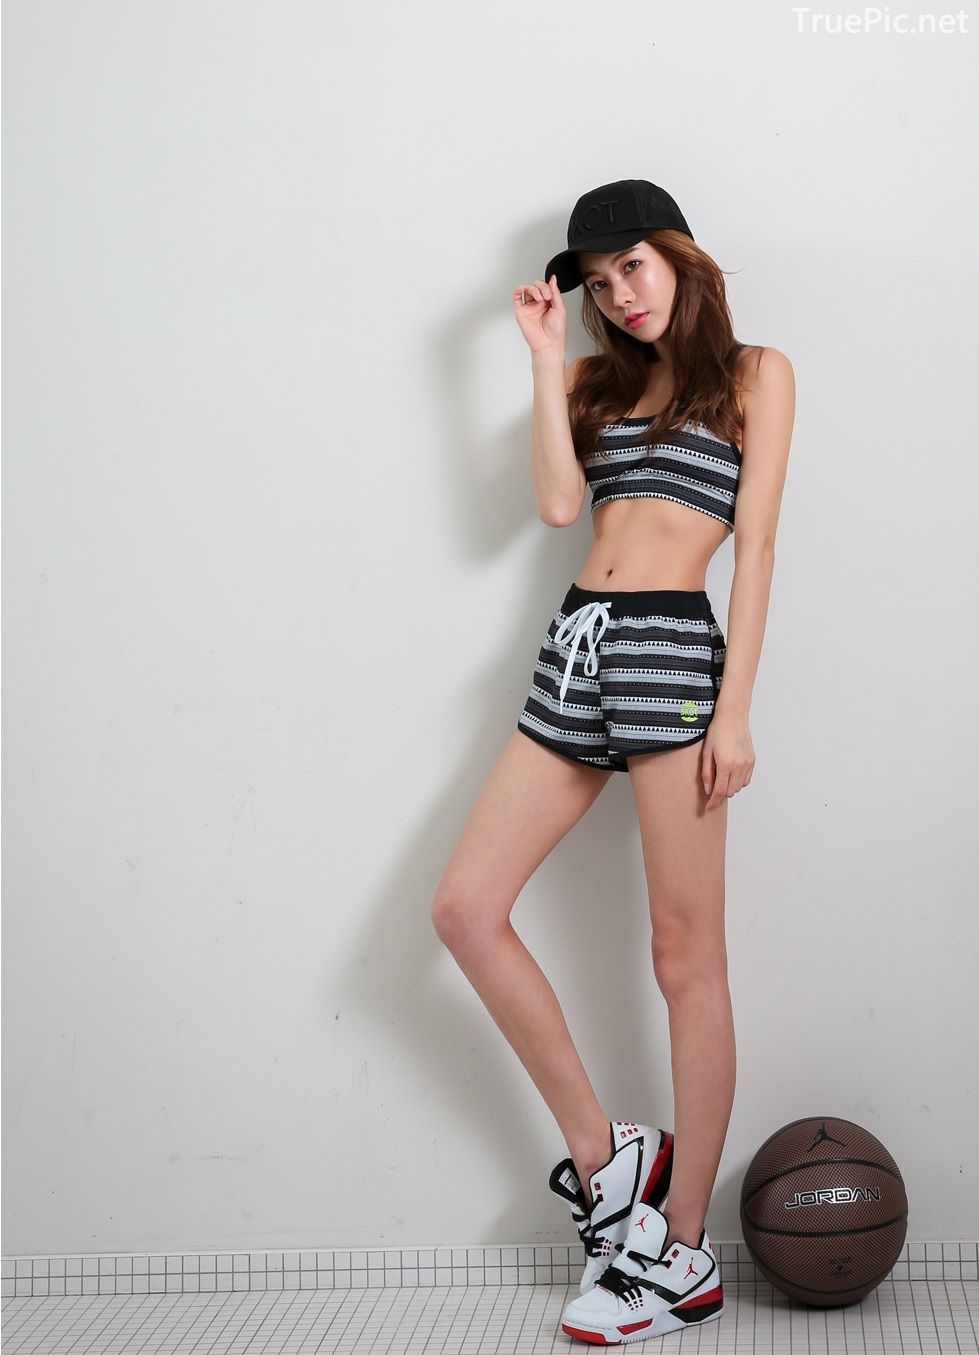 An Seo Rin - Short Shorts Fitness set - Korean model and fashion - Picture 11